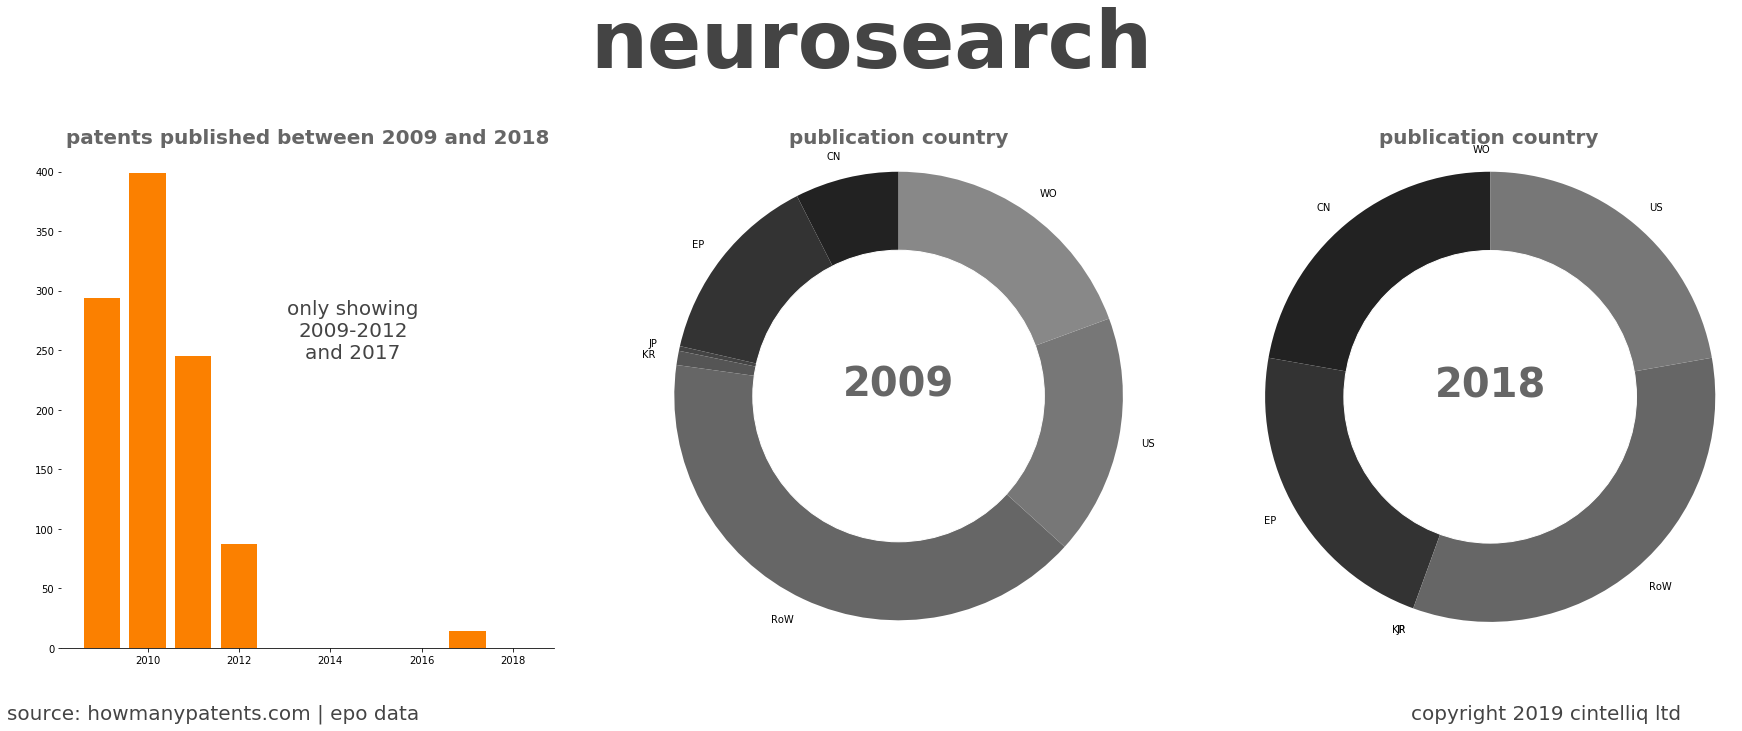 summary of patents for Neurosearch